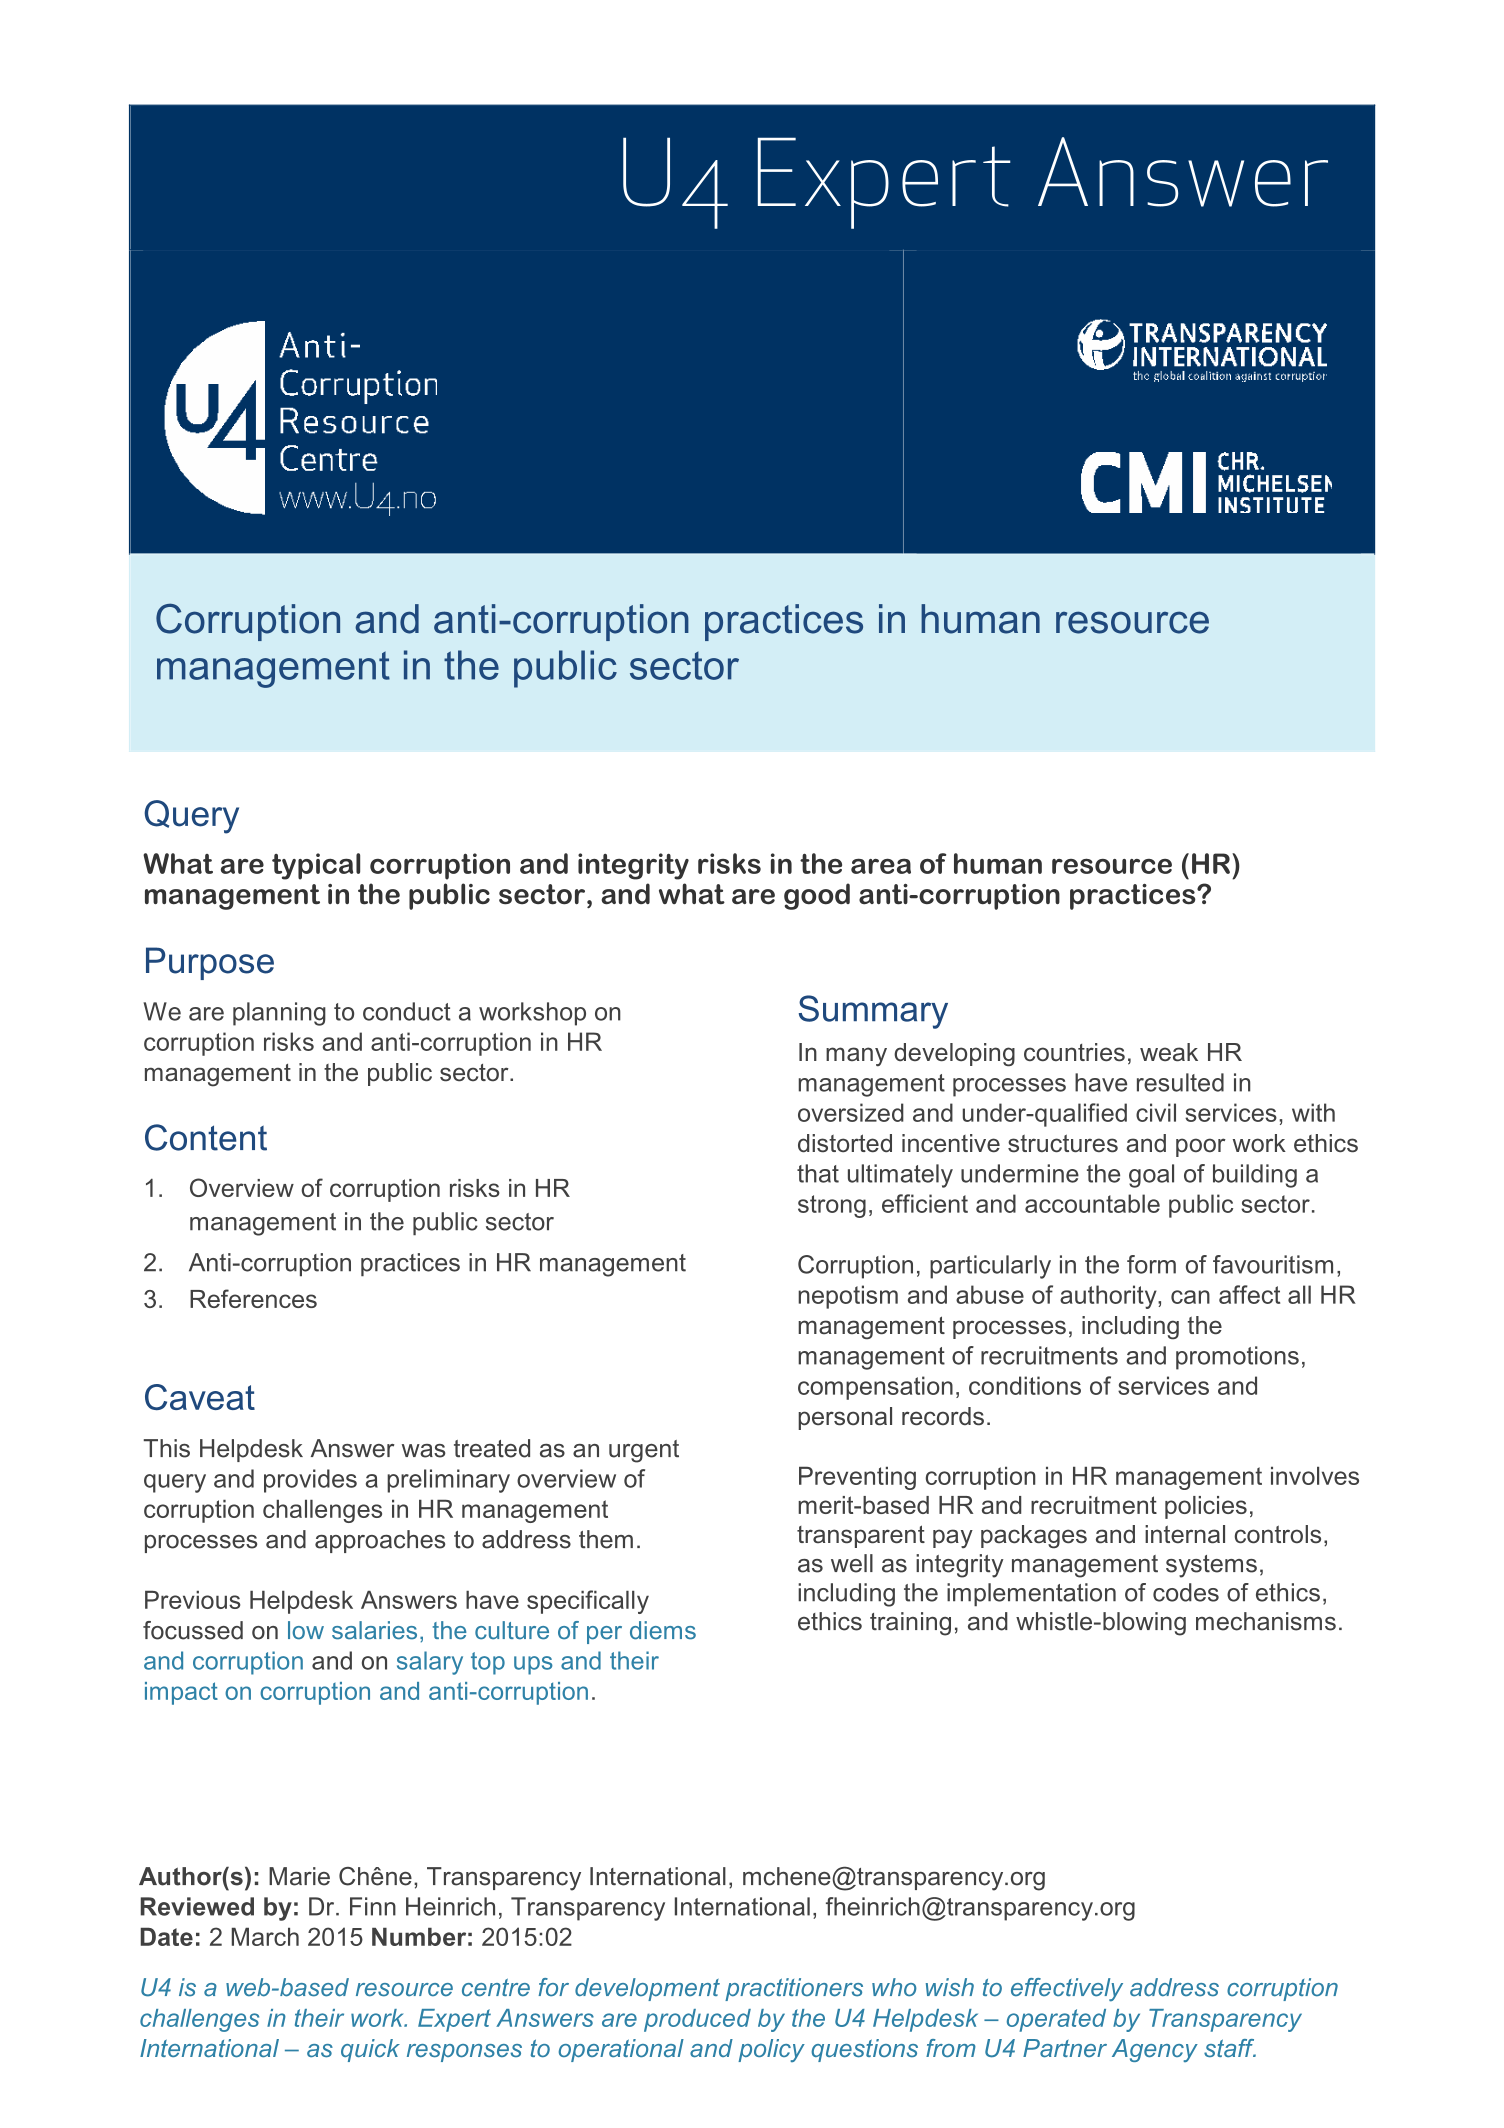 Corruption and anti-corruption practices in human resource management in the public sector 